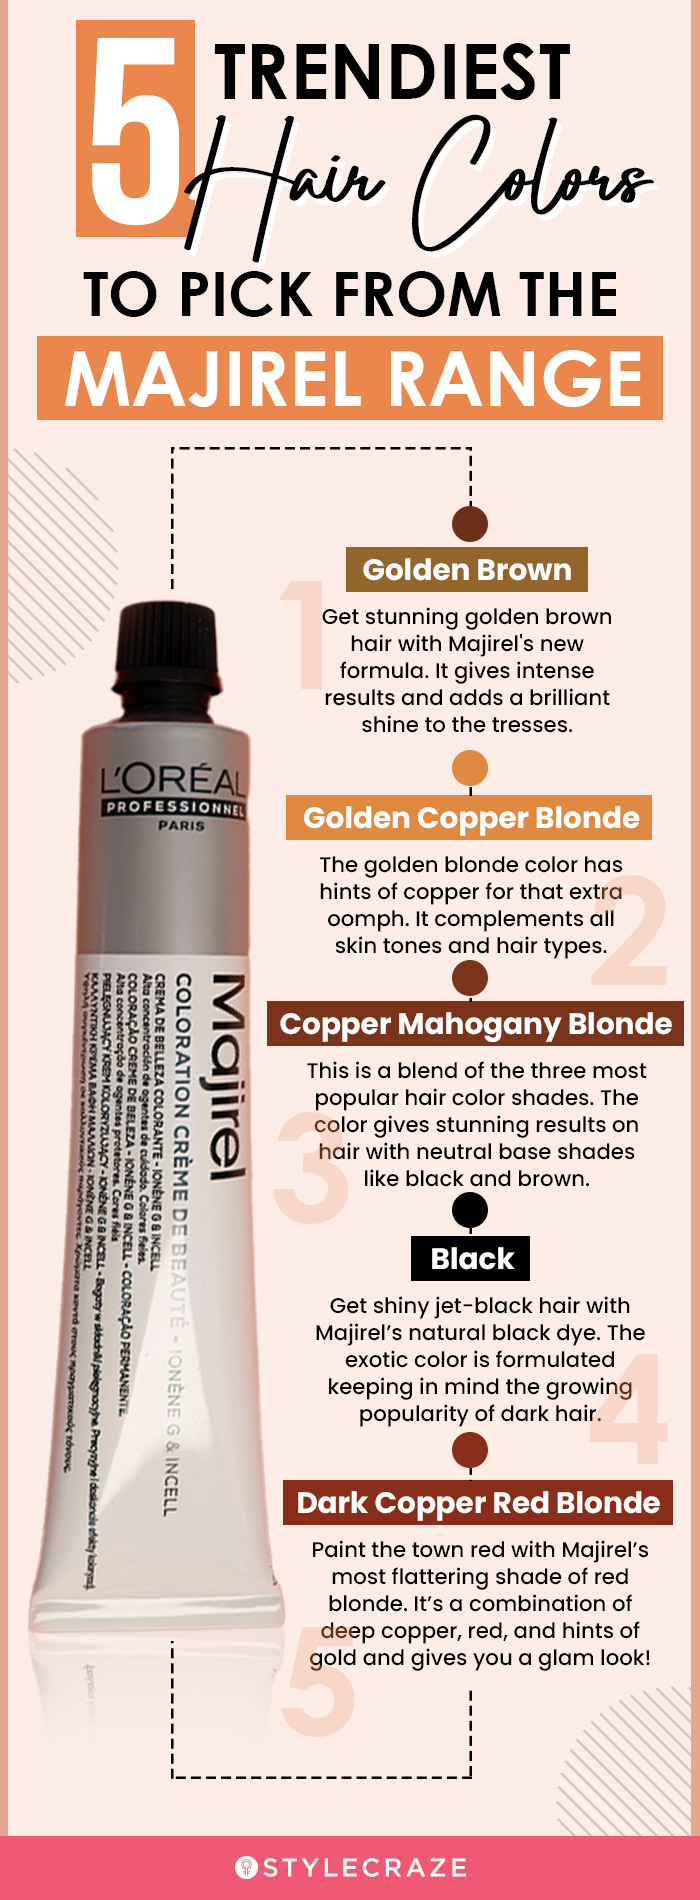 Loreal Professional Majirel Color Creme 5.5 - Mahogany Light Brown 50ml:  Buy Online at Best Price in Egypt - Souq is now Amazon.eg